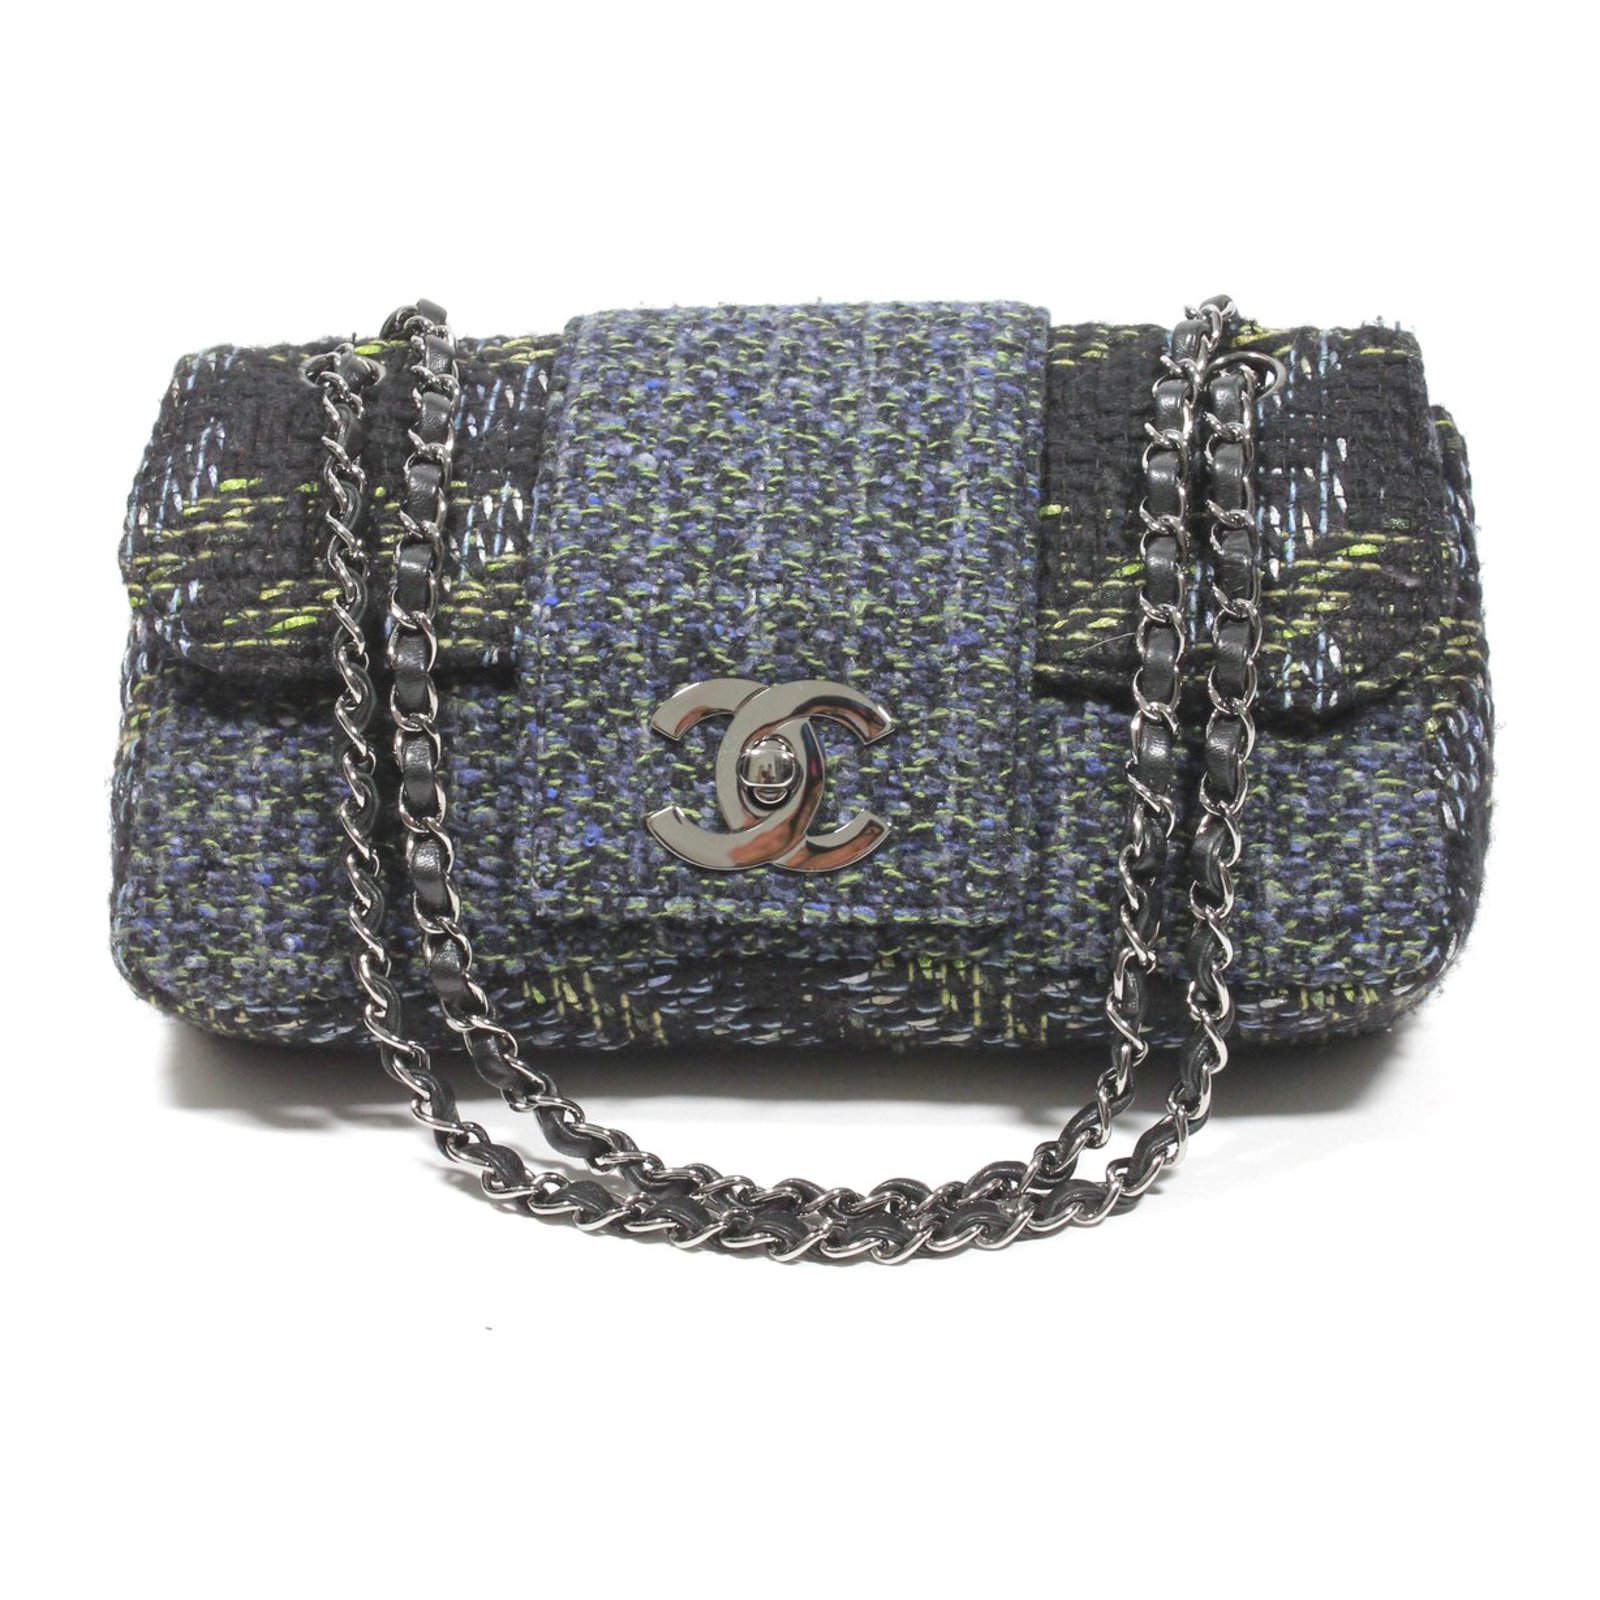 Chanel Large Fantasy Tweed Quilted Tote